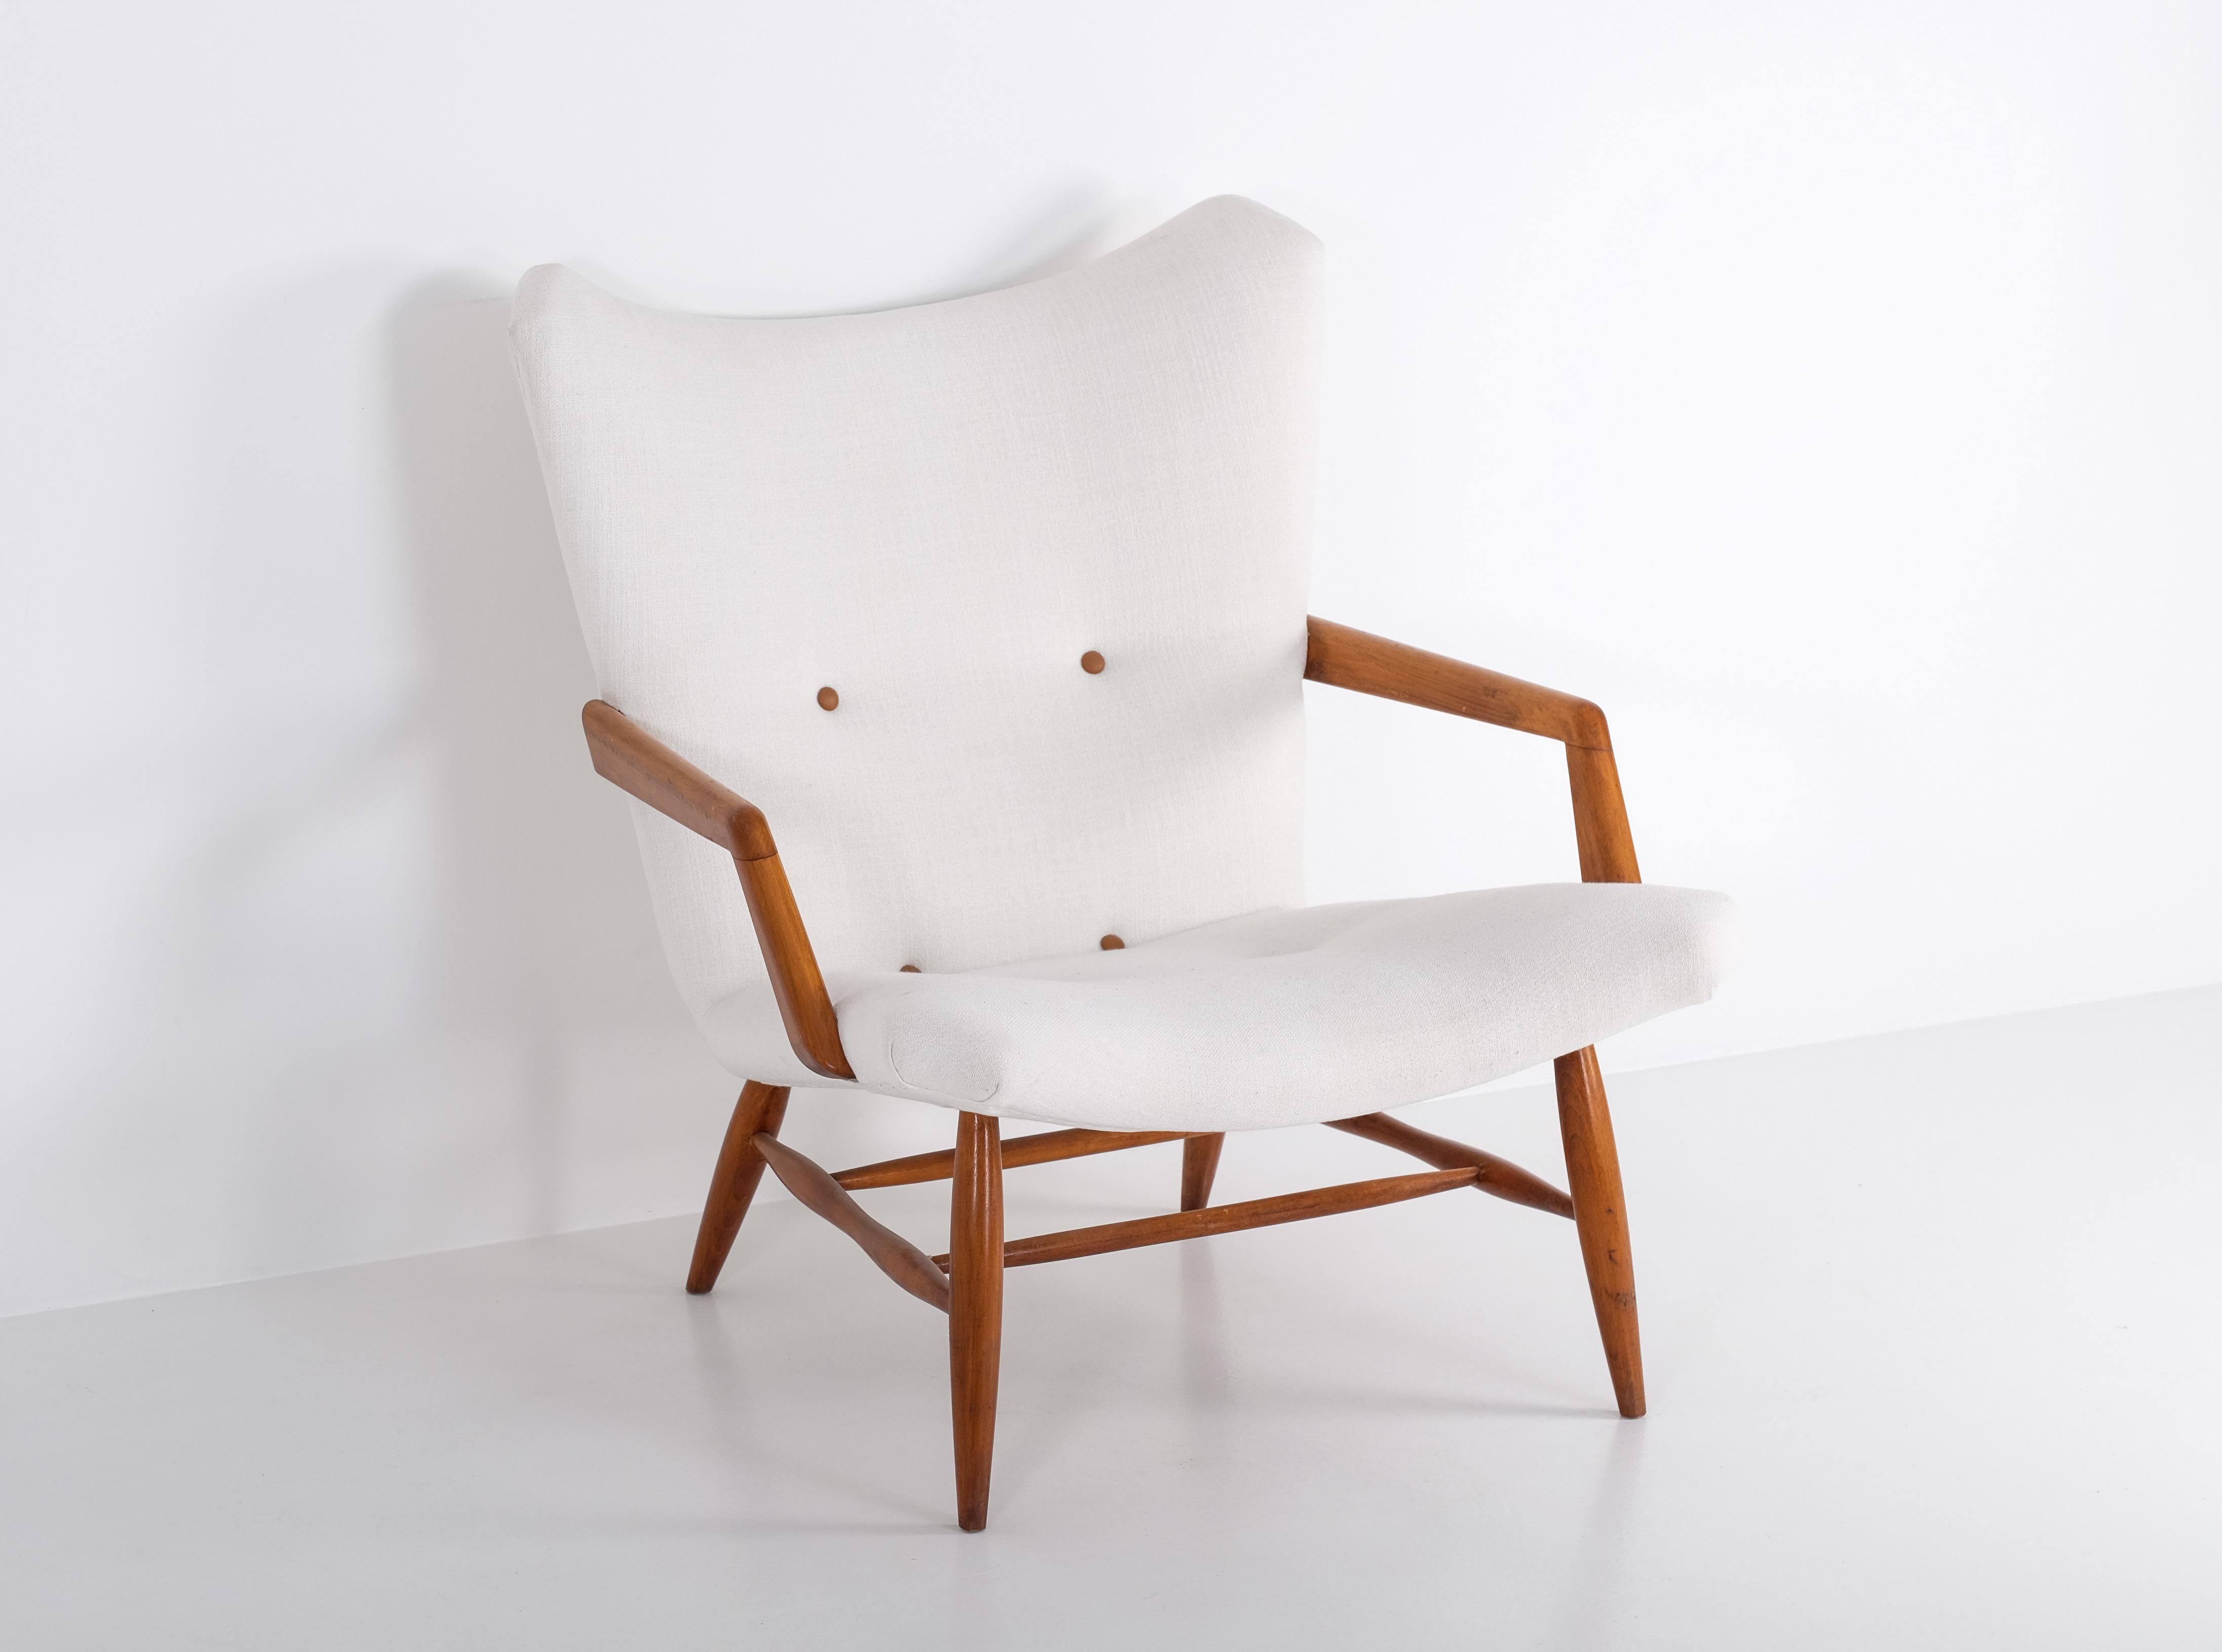 A mahogany easy chair designed by Svante Skogh, Sweden, 1950s.
Reupholstered. Excellent condition.